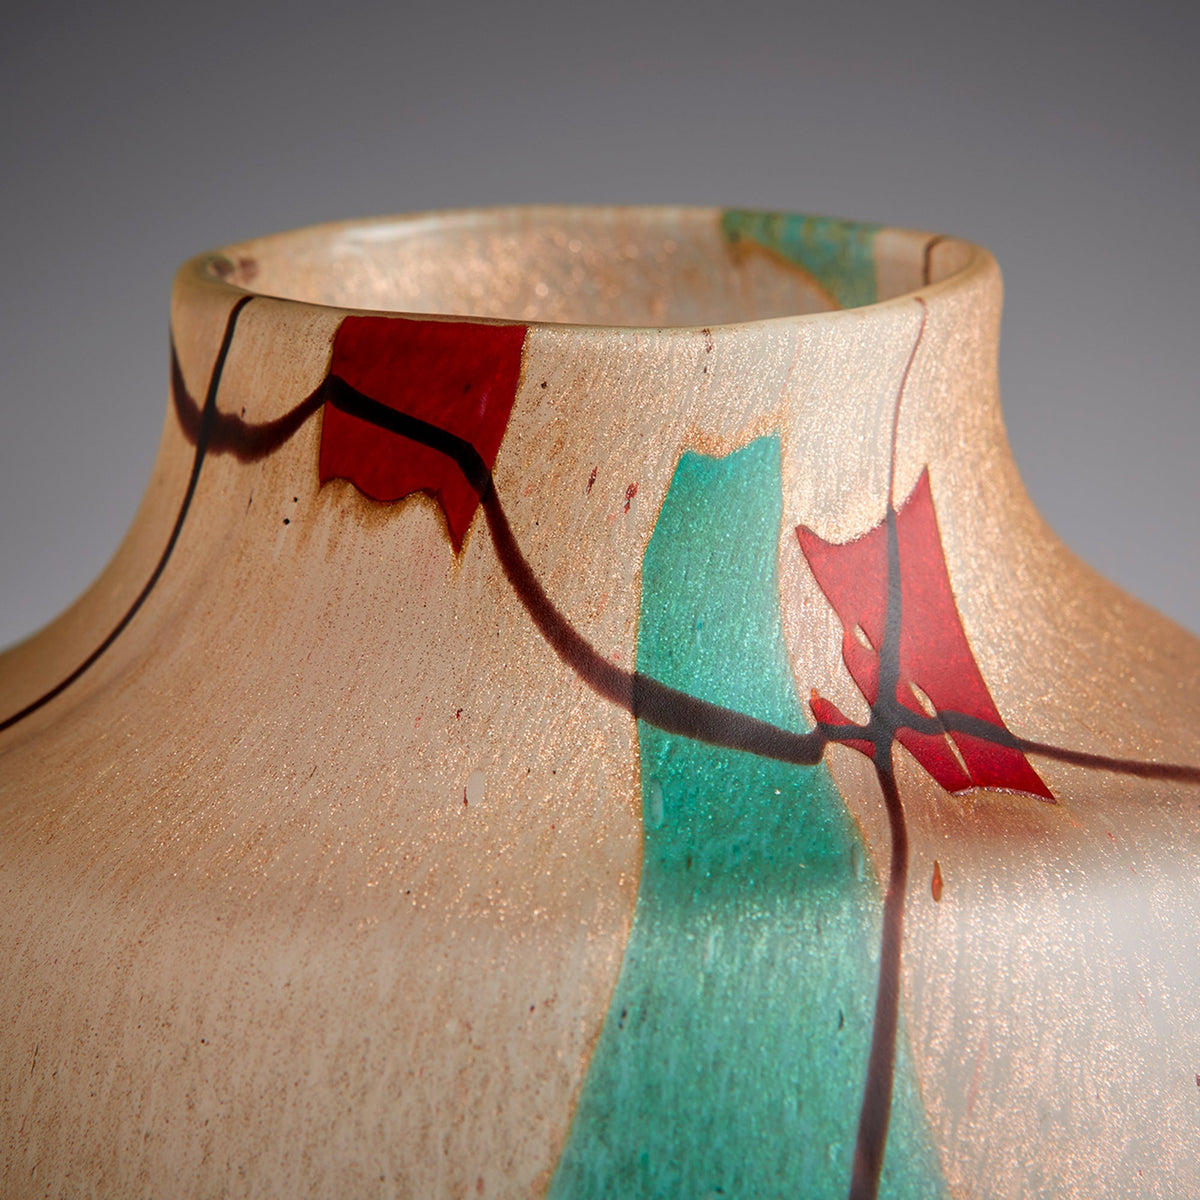 Cuzco Vase | Amber -Large by Cyan